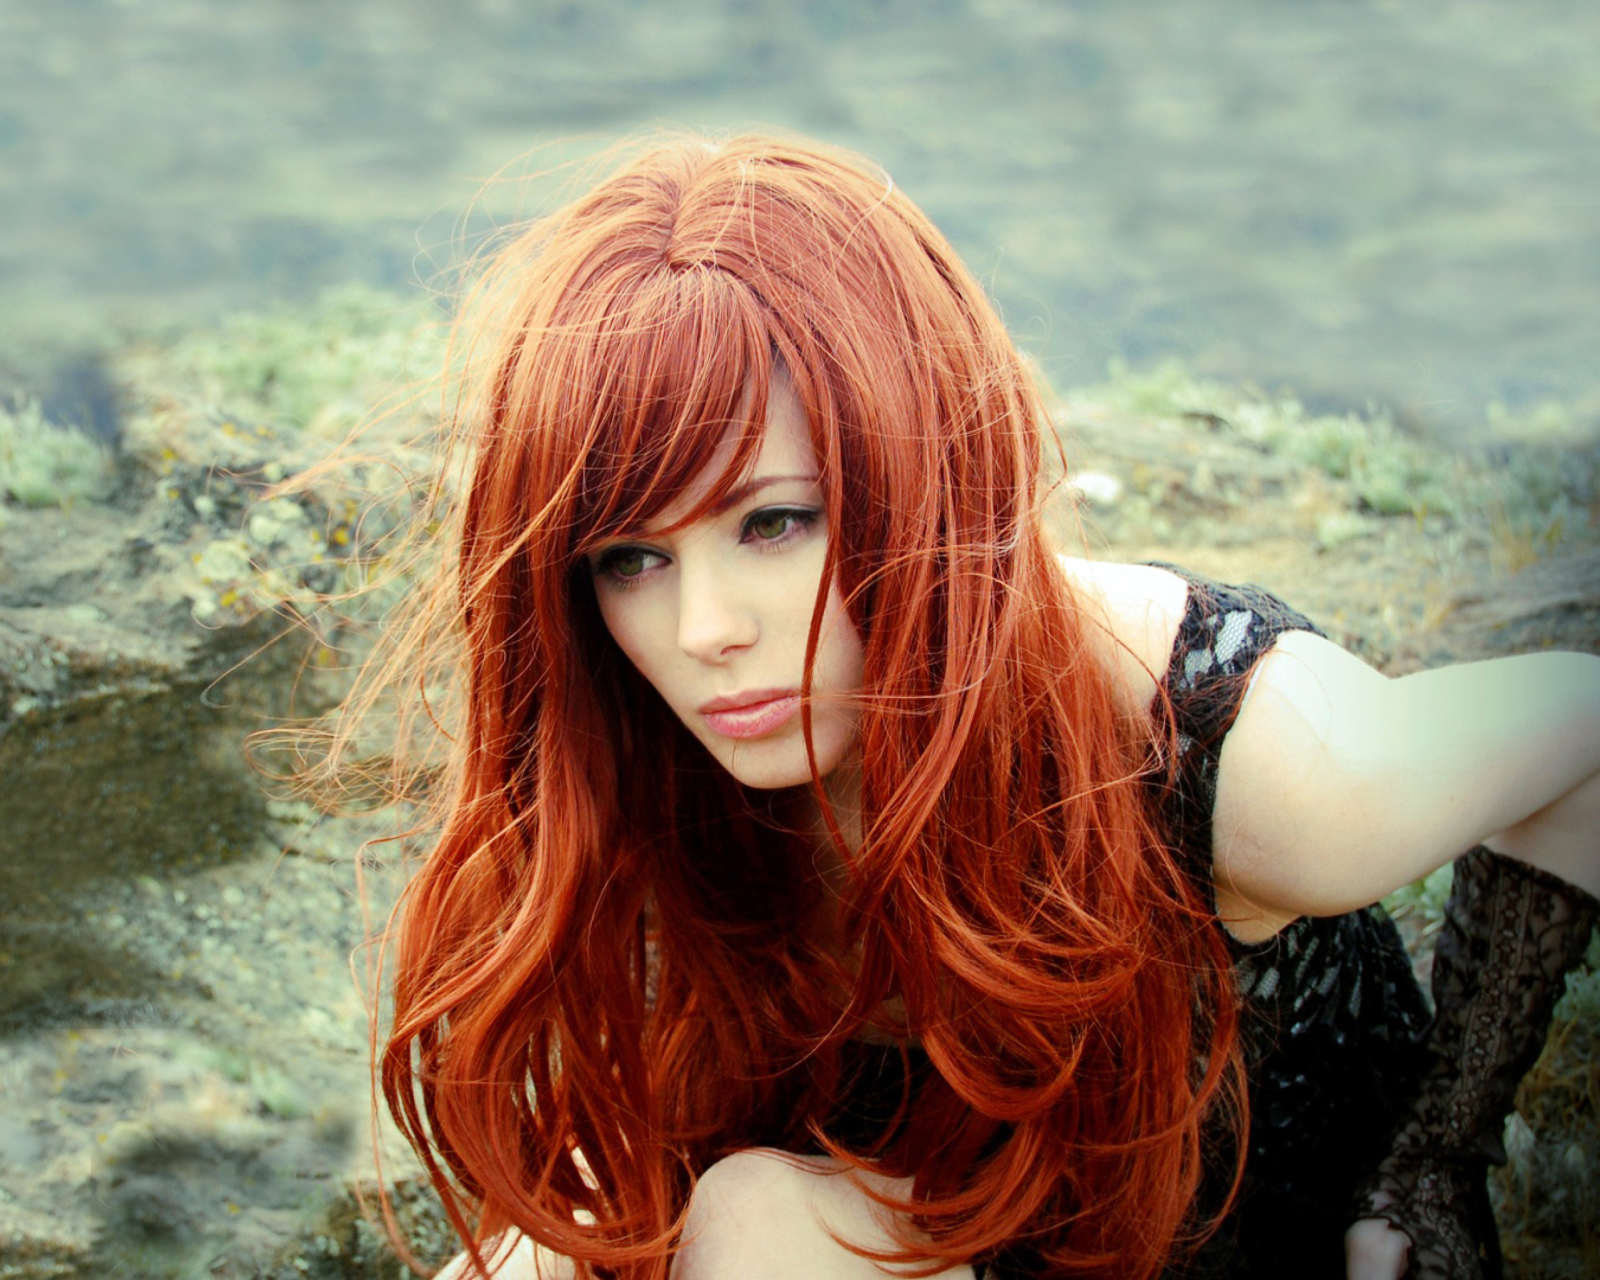 Gorgeous Red Hair Girl With Green Eyes screenshot #1 1600x1280